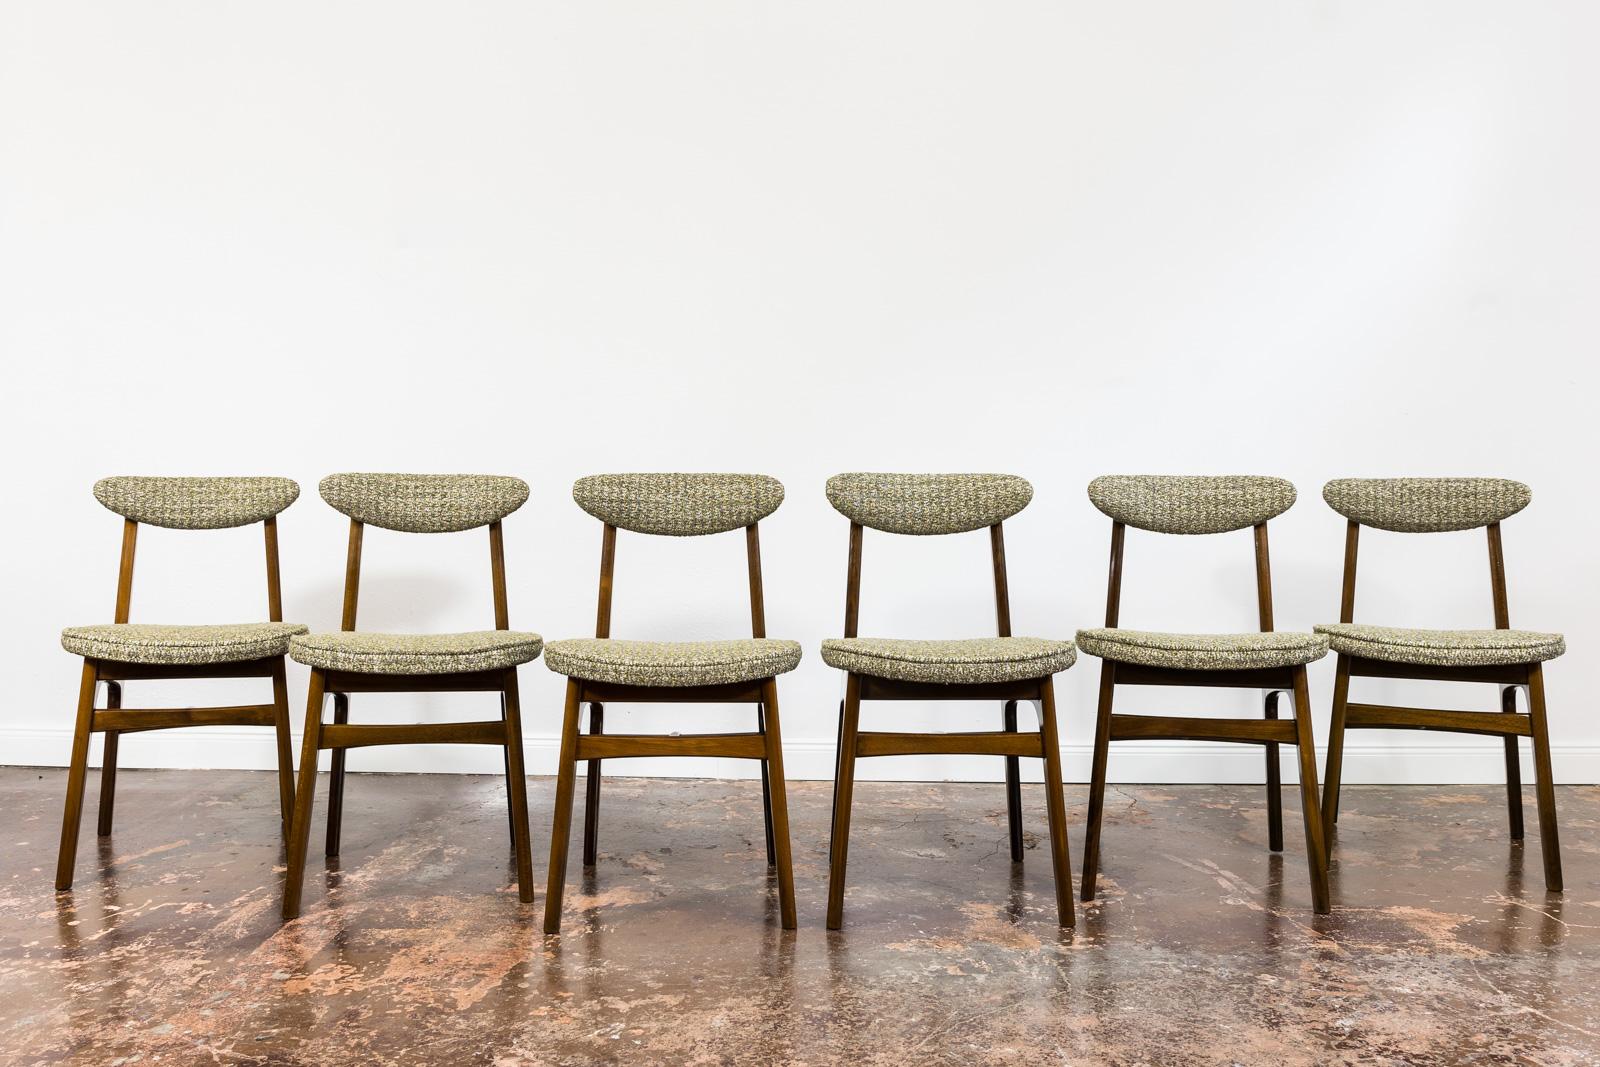 Set of 6, restored dining chairs by Rajmund Teofil Hałas 1960's, Poland.

This set has been completely restored. Beech wood has been refinished. repuholstred in high quality green melange fabric.

 